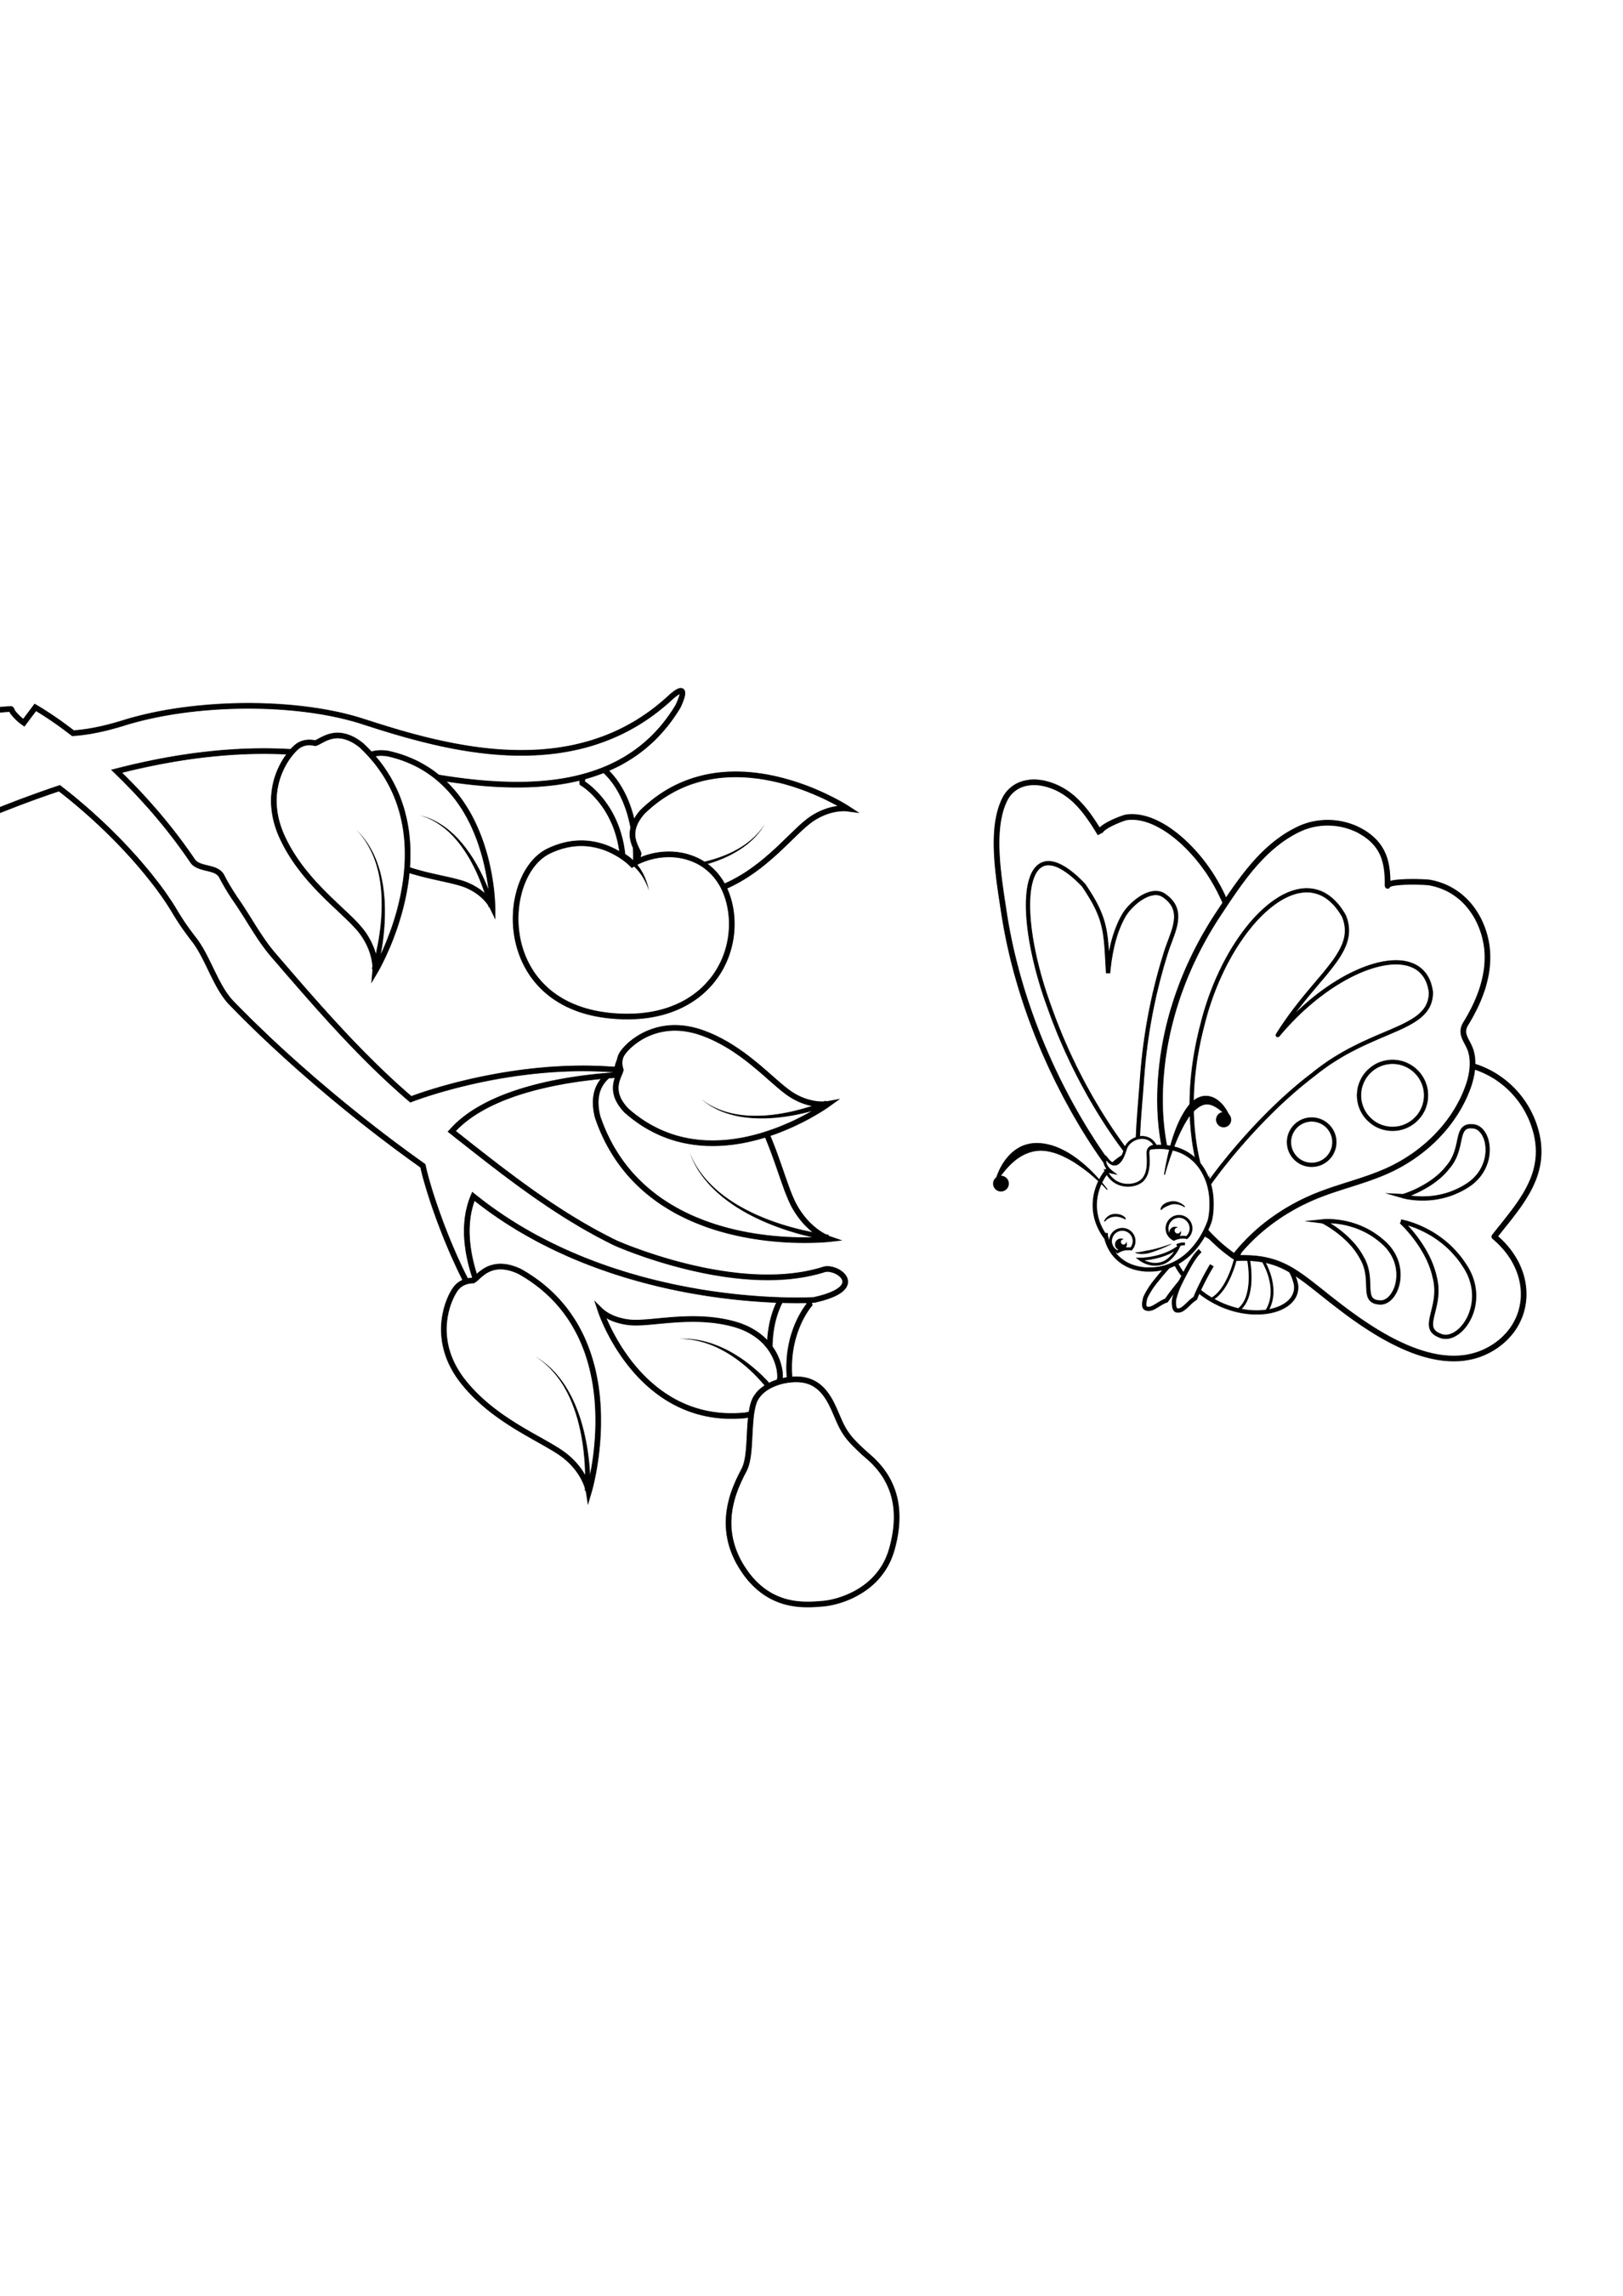 Cute Cartoon Butterfly and the Apple Tree